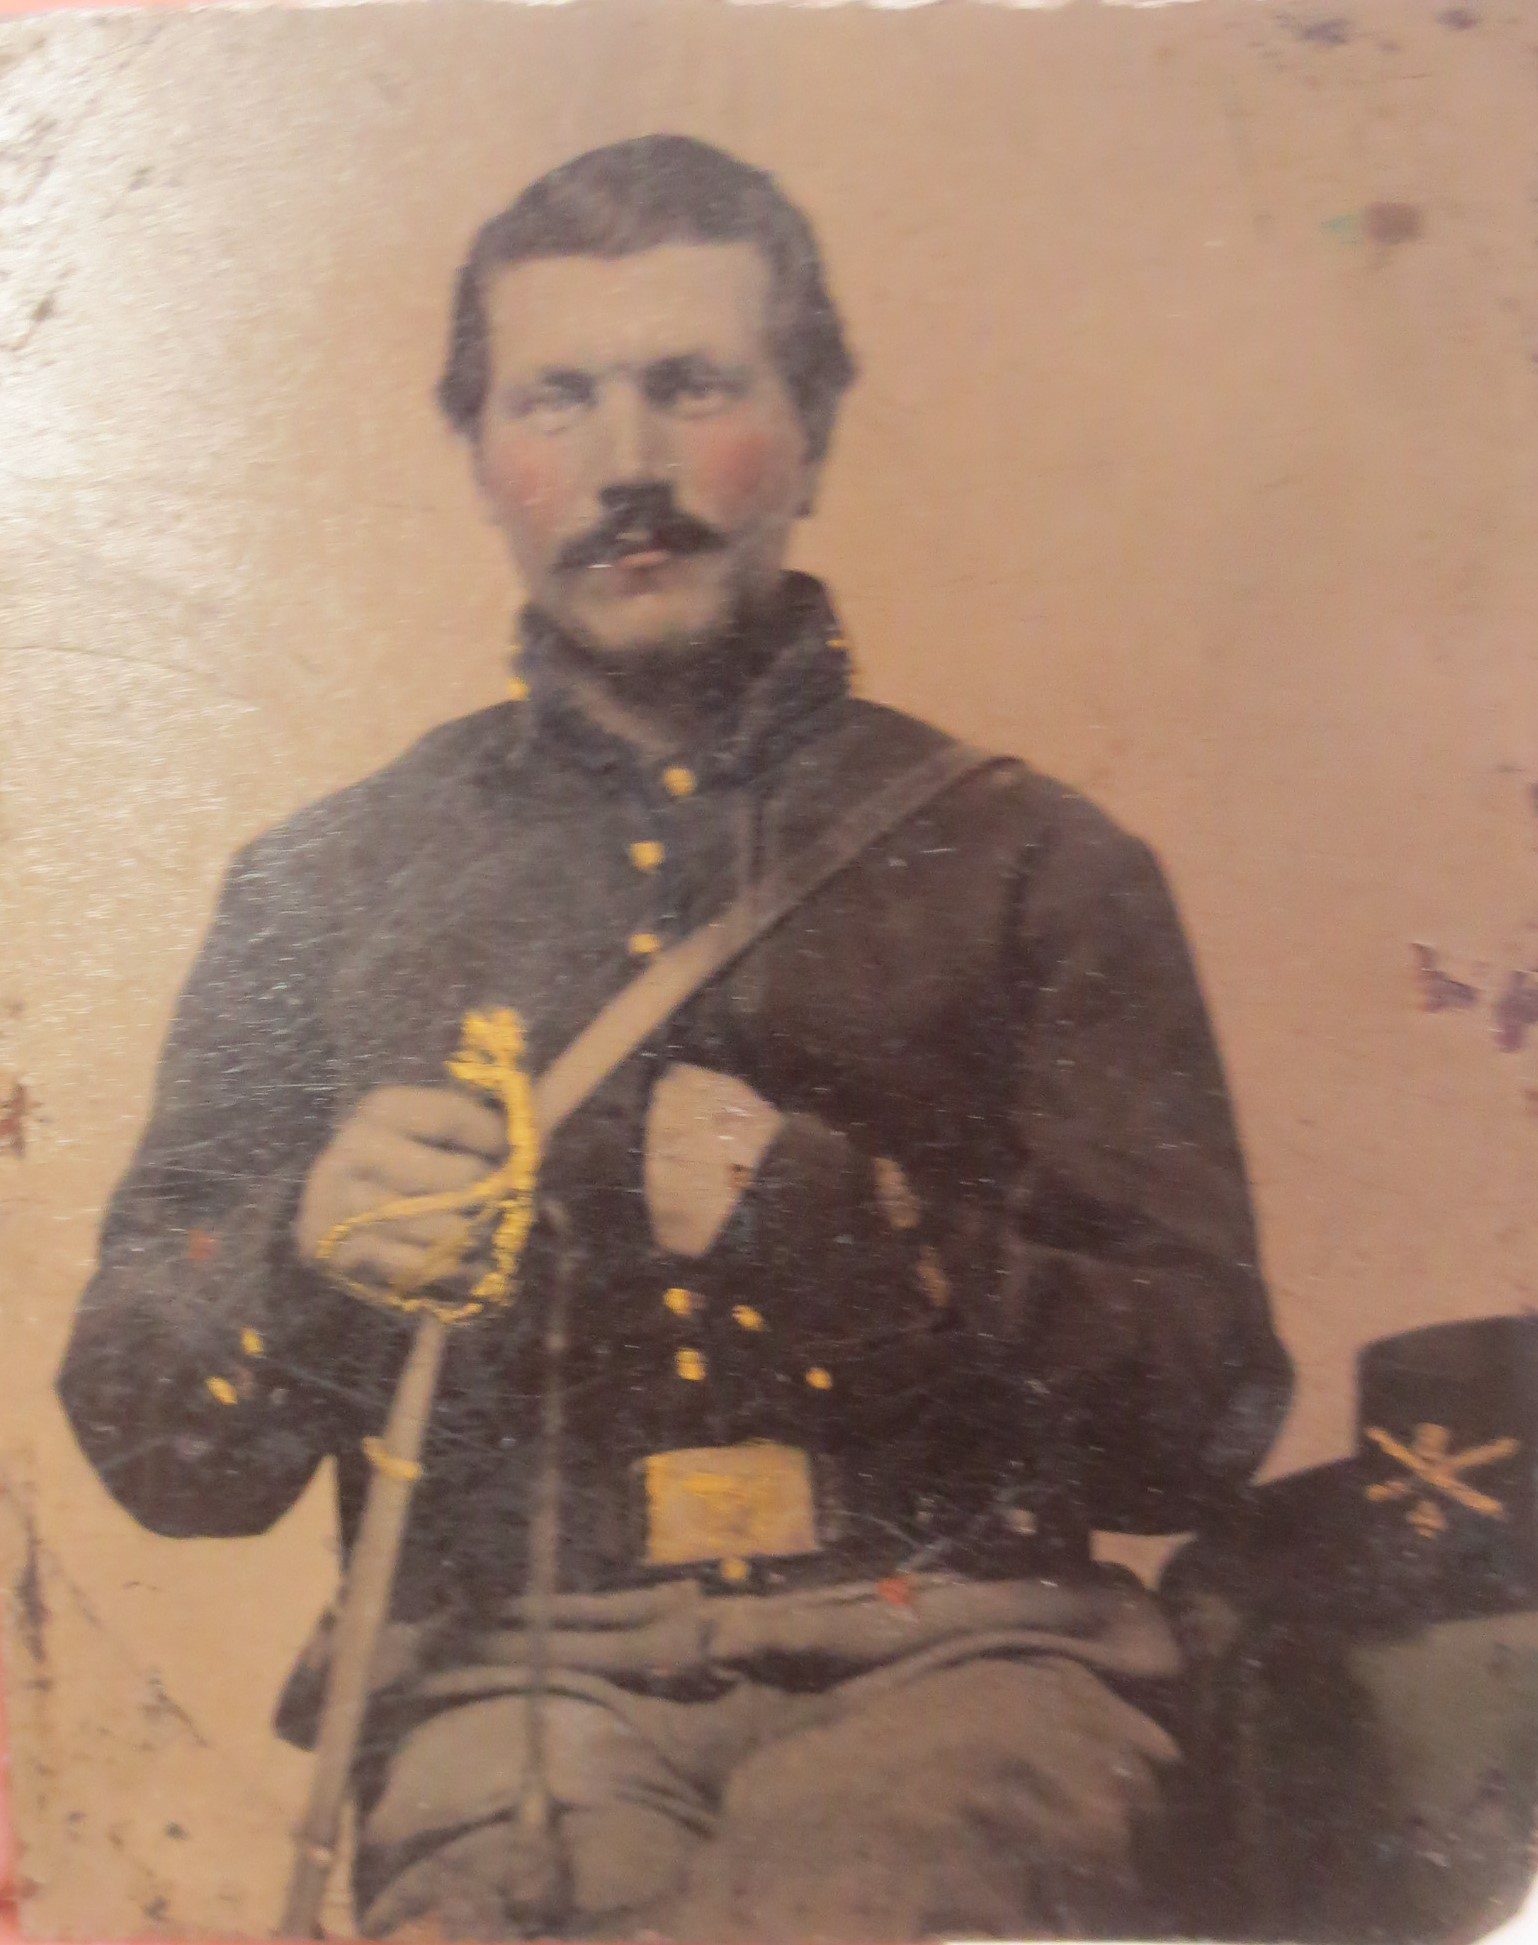 Image of a soldier seated wearing cavalry shell jacket